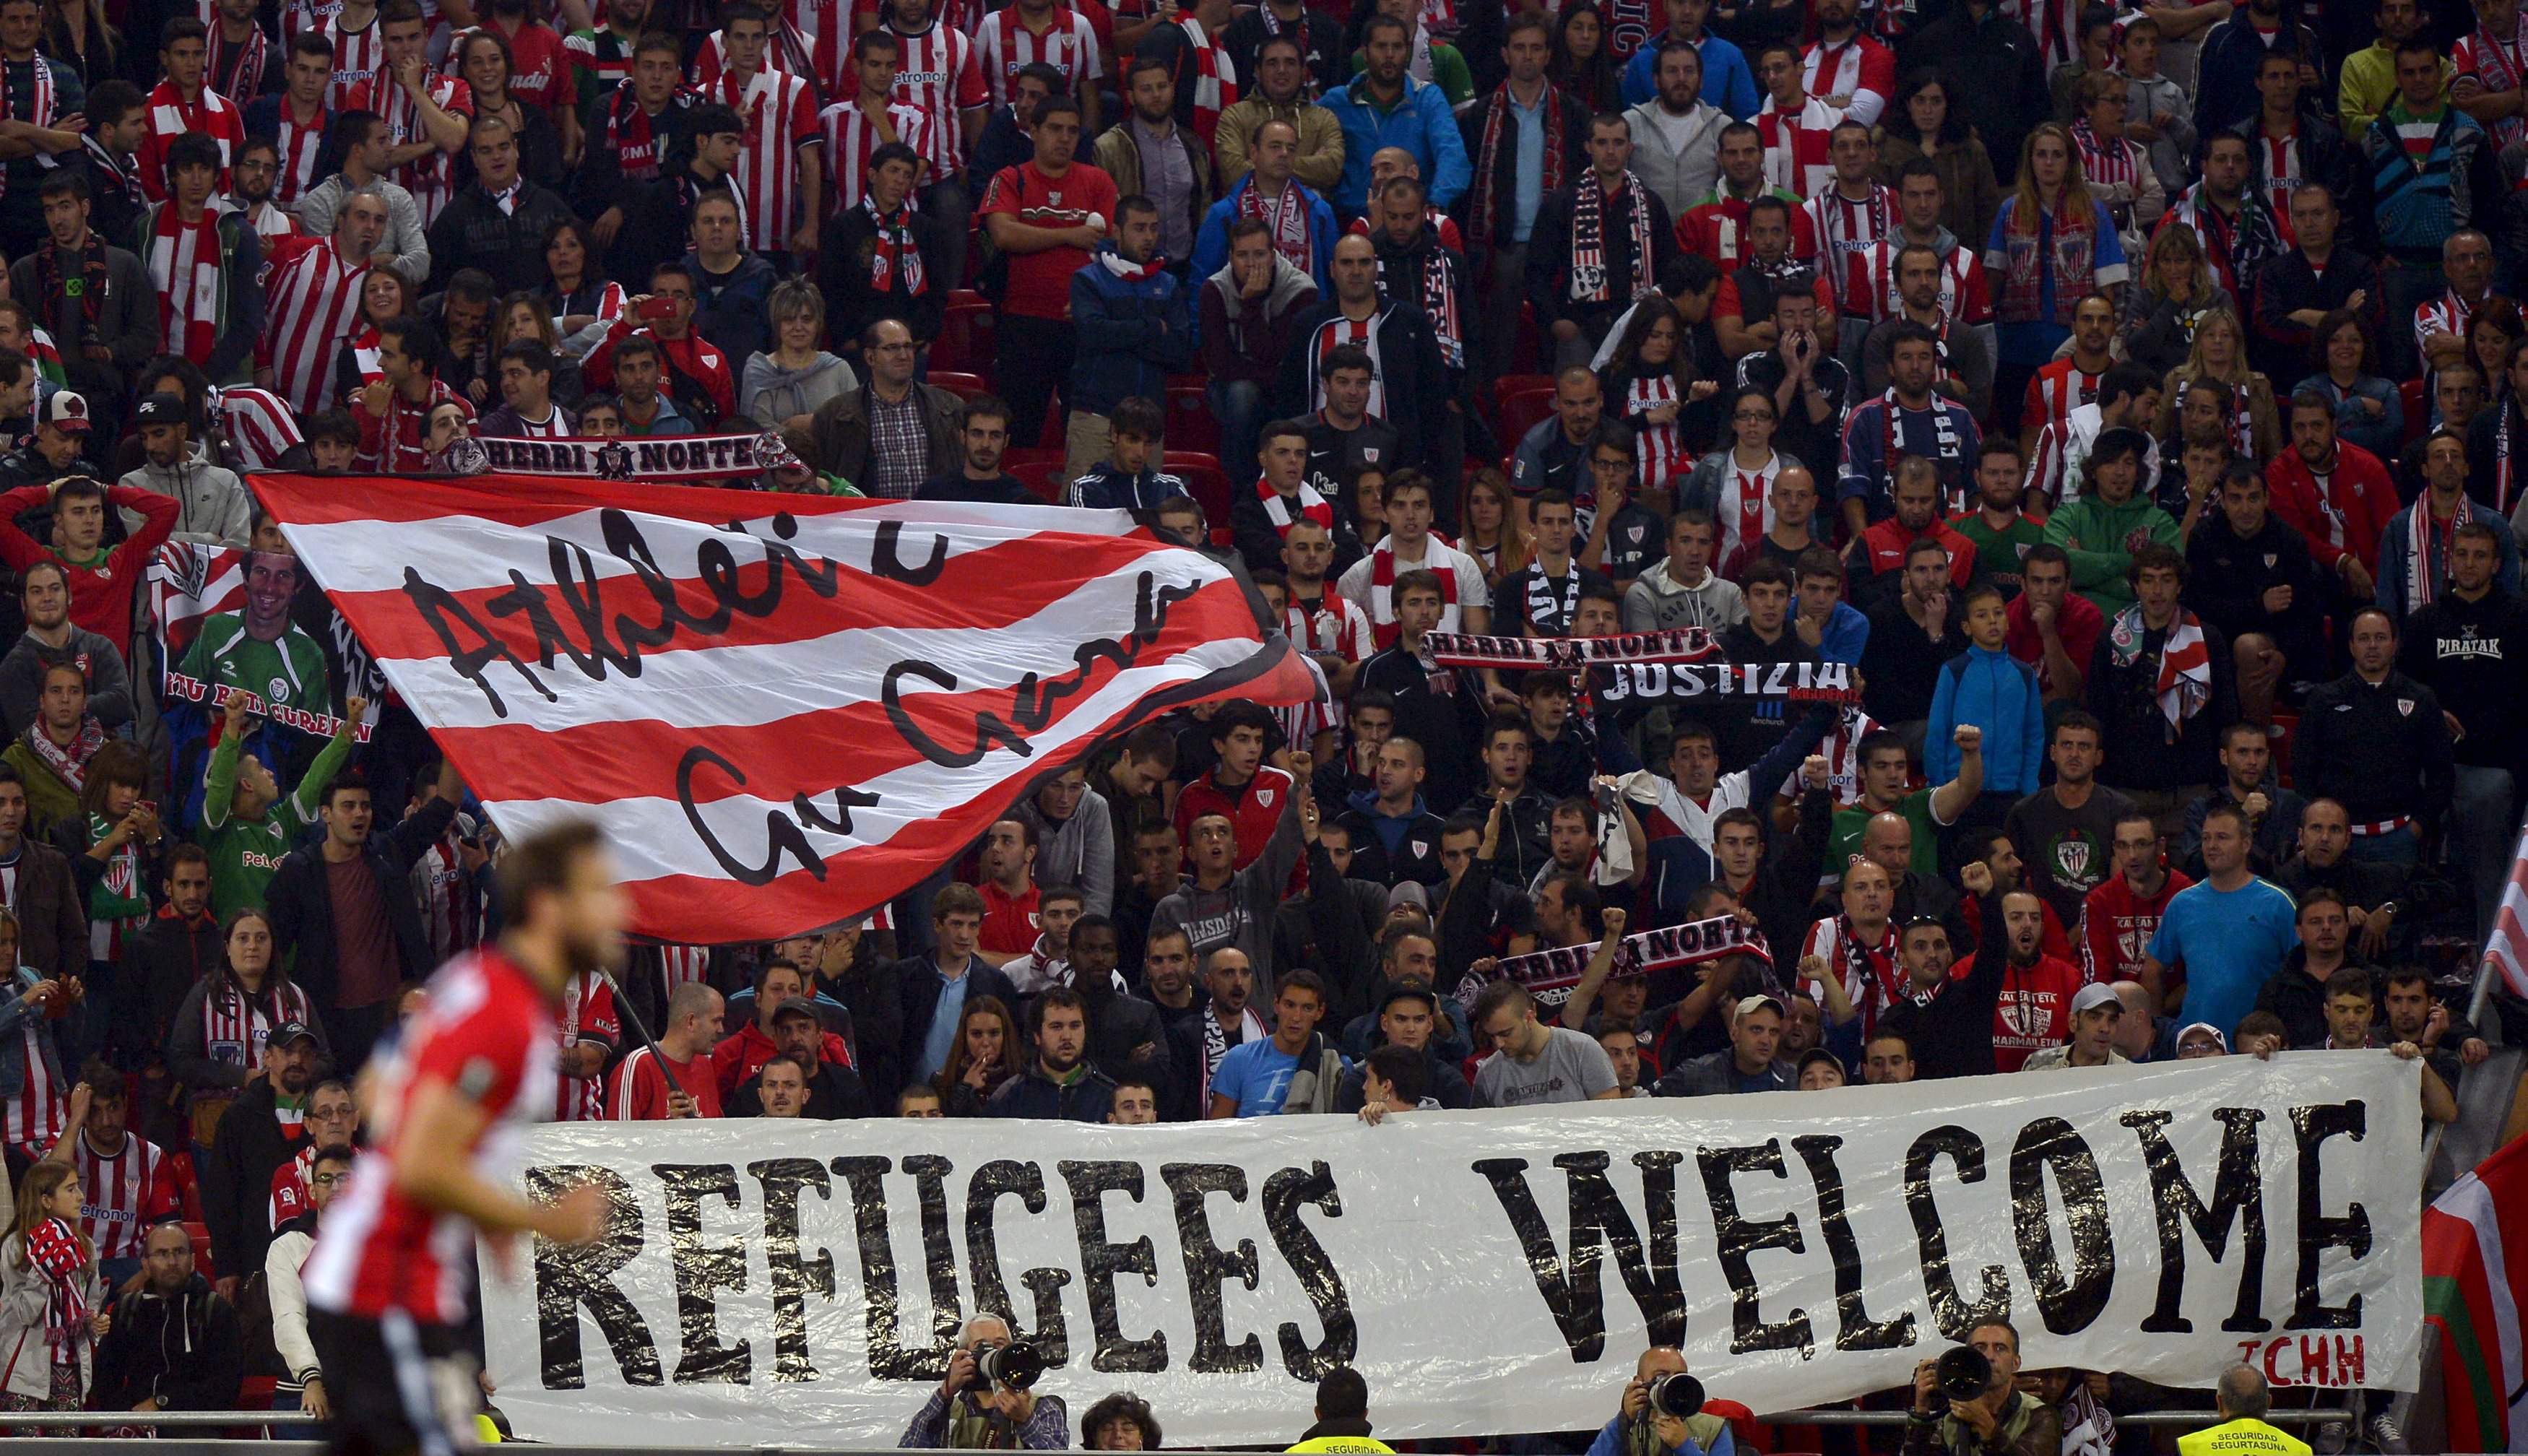 Athletic Bilbao fans from the Herri Norte section hold up a sign reading Refugees Welcome during their UEFA Europa League Group L Group Stage soccer match against Augsburg at San Mames stadium in Bilbao, northern Spain, September 17, 2015. Athletic won 3-1. REUTERS/Vincent West